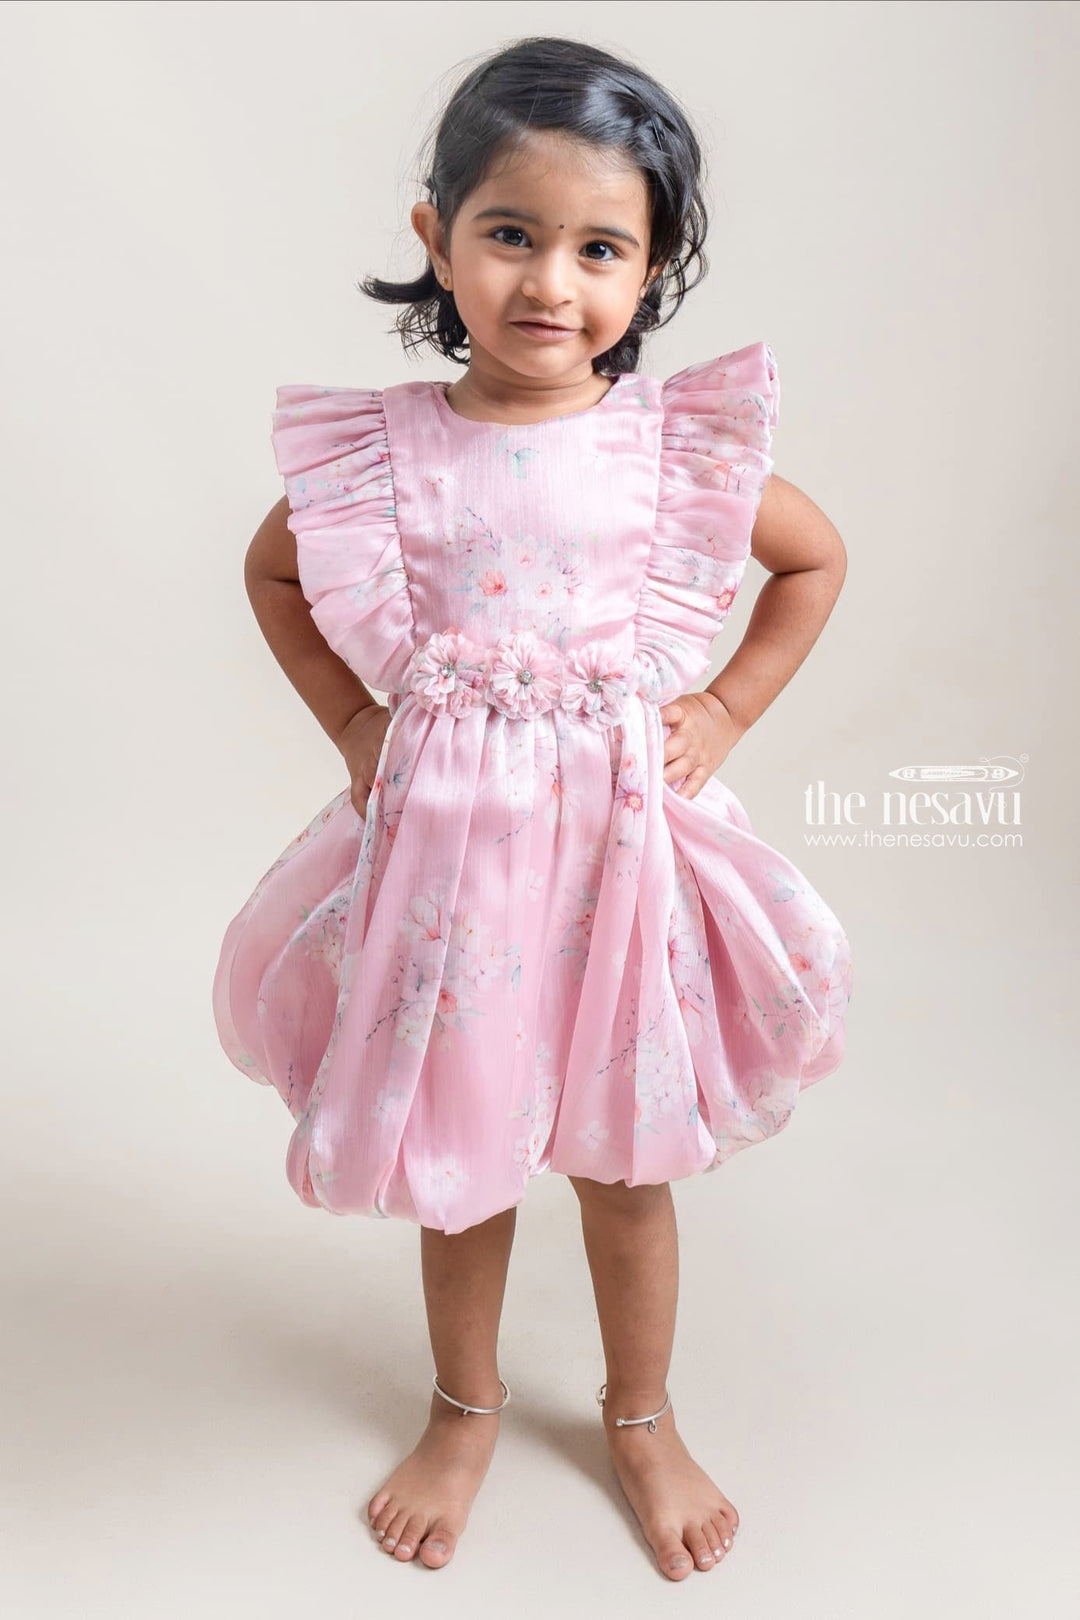 The Nesavu Baby Fancy Frock Pretty Onion Pink Floral Printed Ruffled Sleeve Organza Frock For Baby Girls Nesavu 14 (6M) / Pink / Organza BFJ387A-14 Premium Chiffon Baby Frock | Latest Baby Frock Collection | The Nesavu